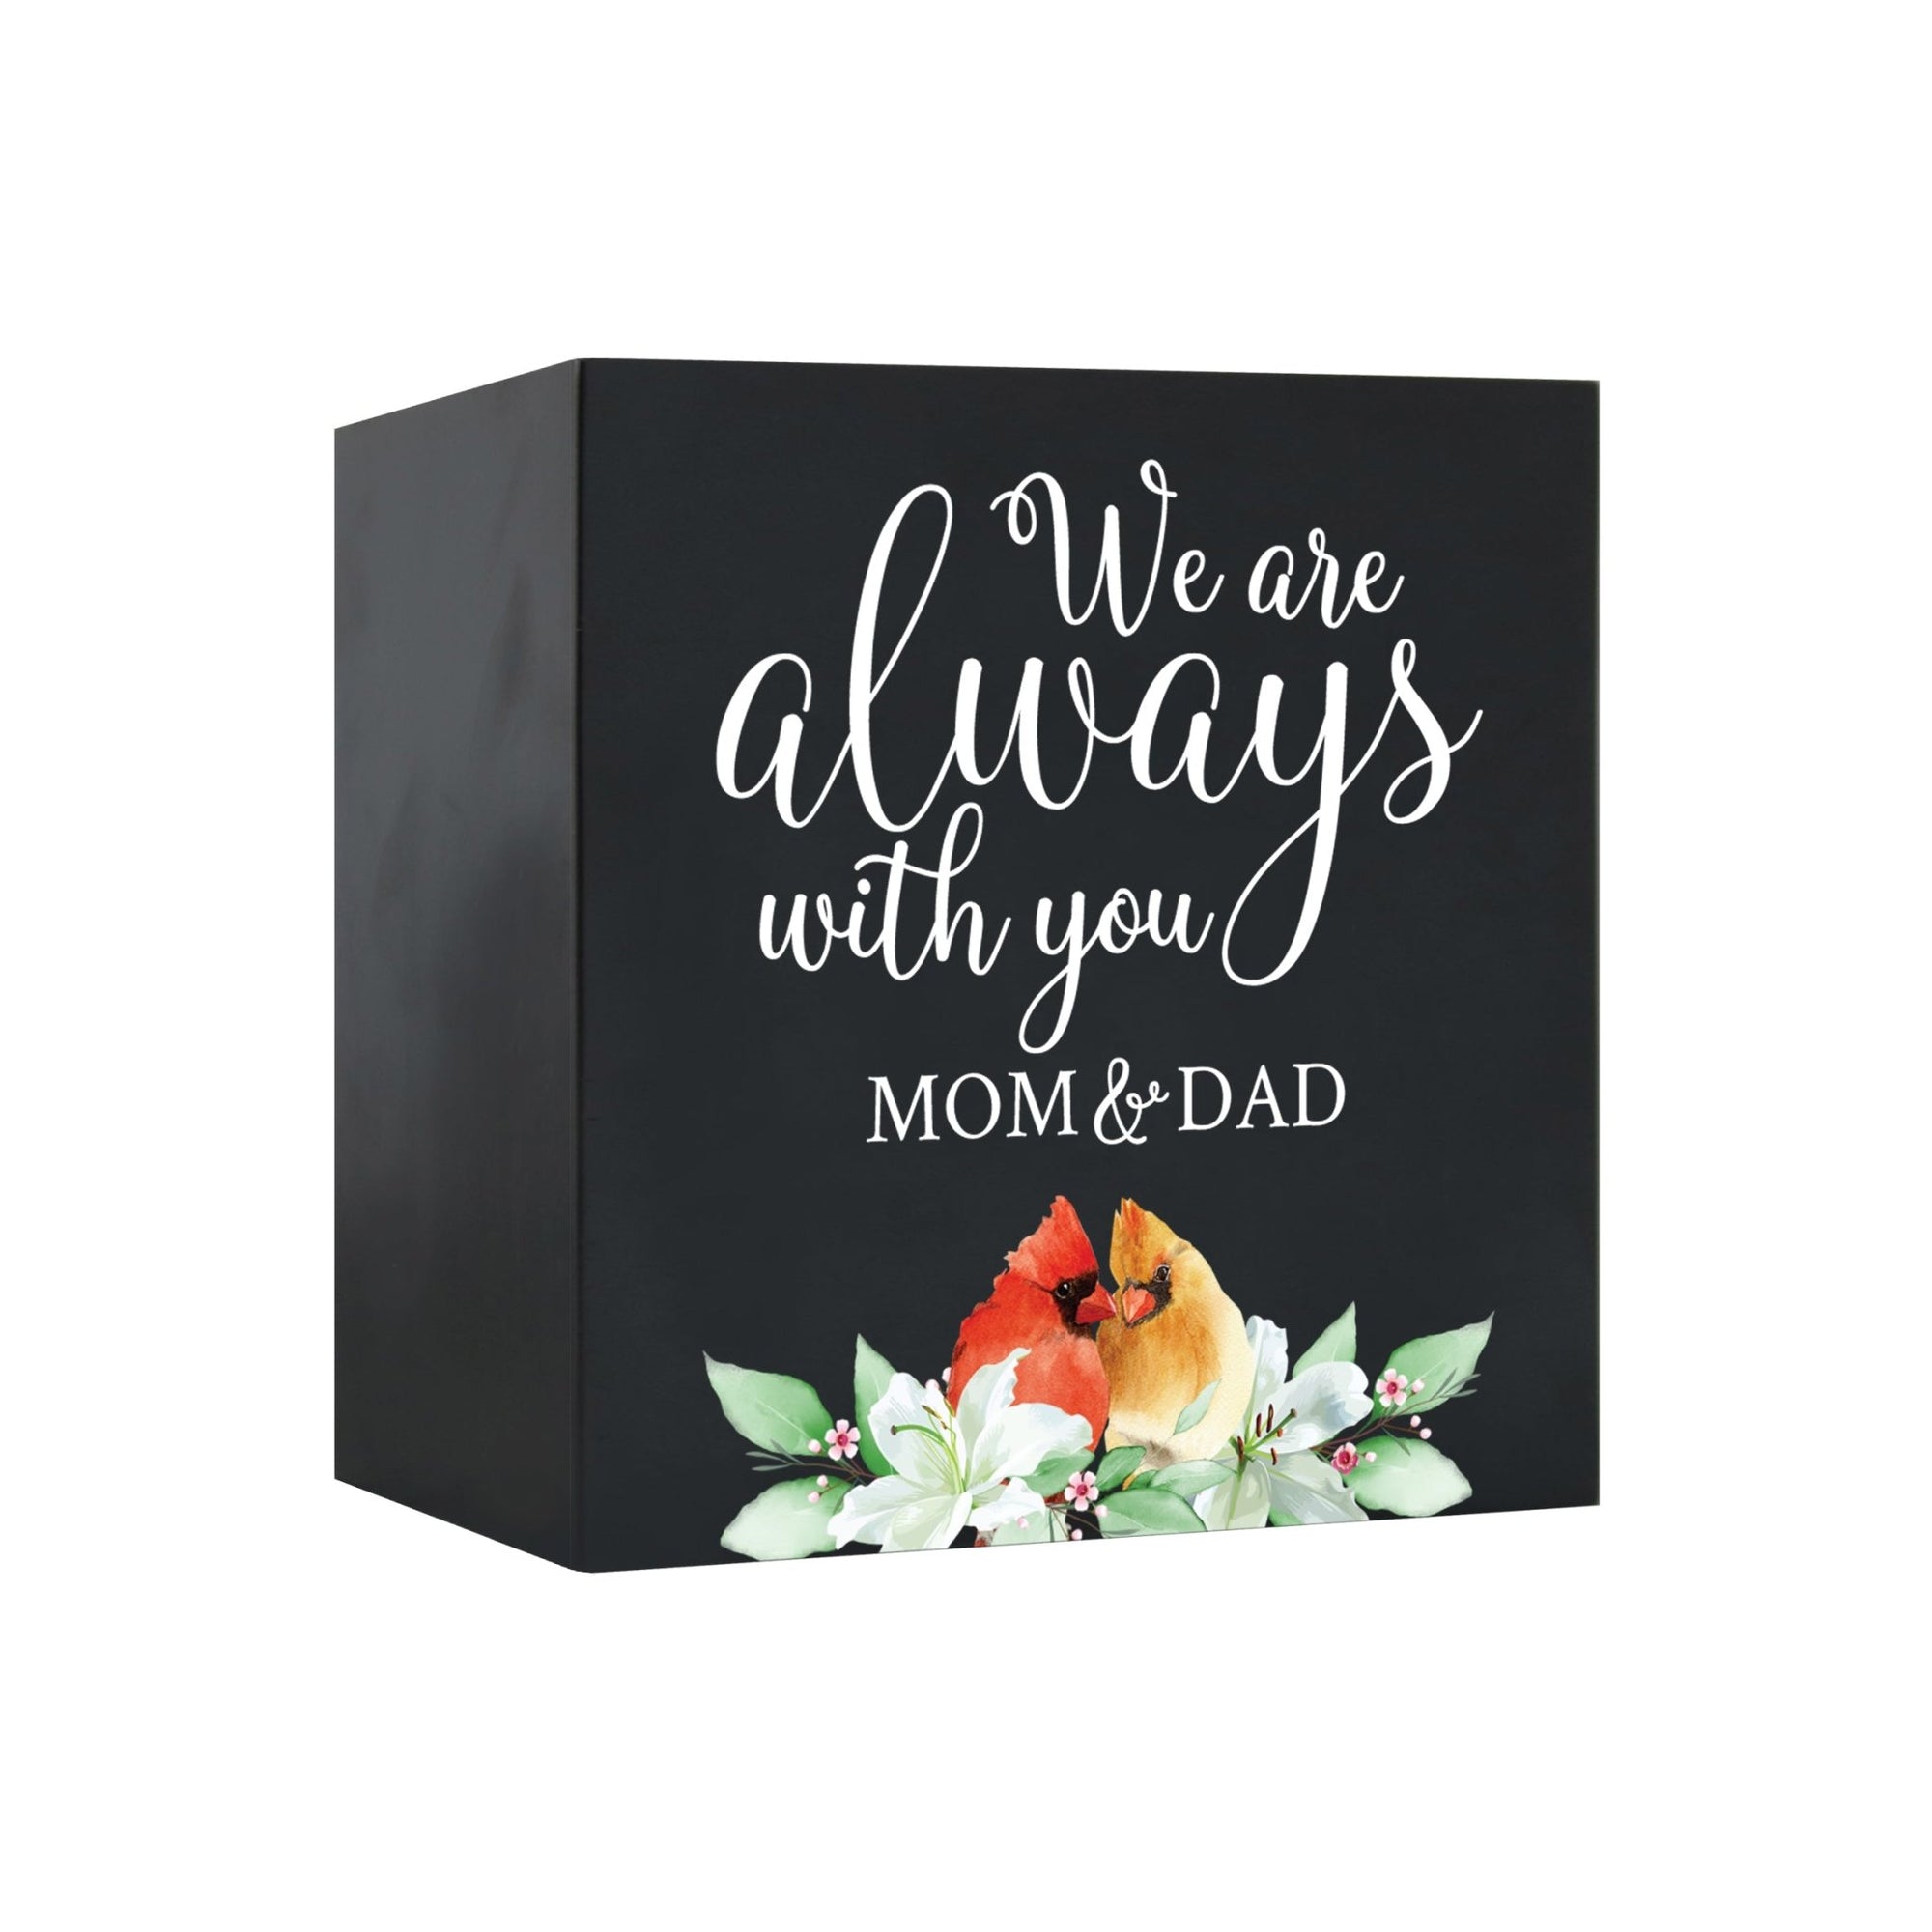 A wooden cremation urn box with a decorative design, suitable for holding human ashes.